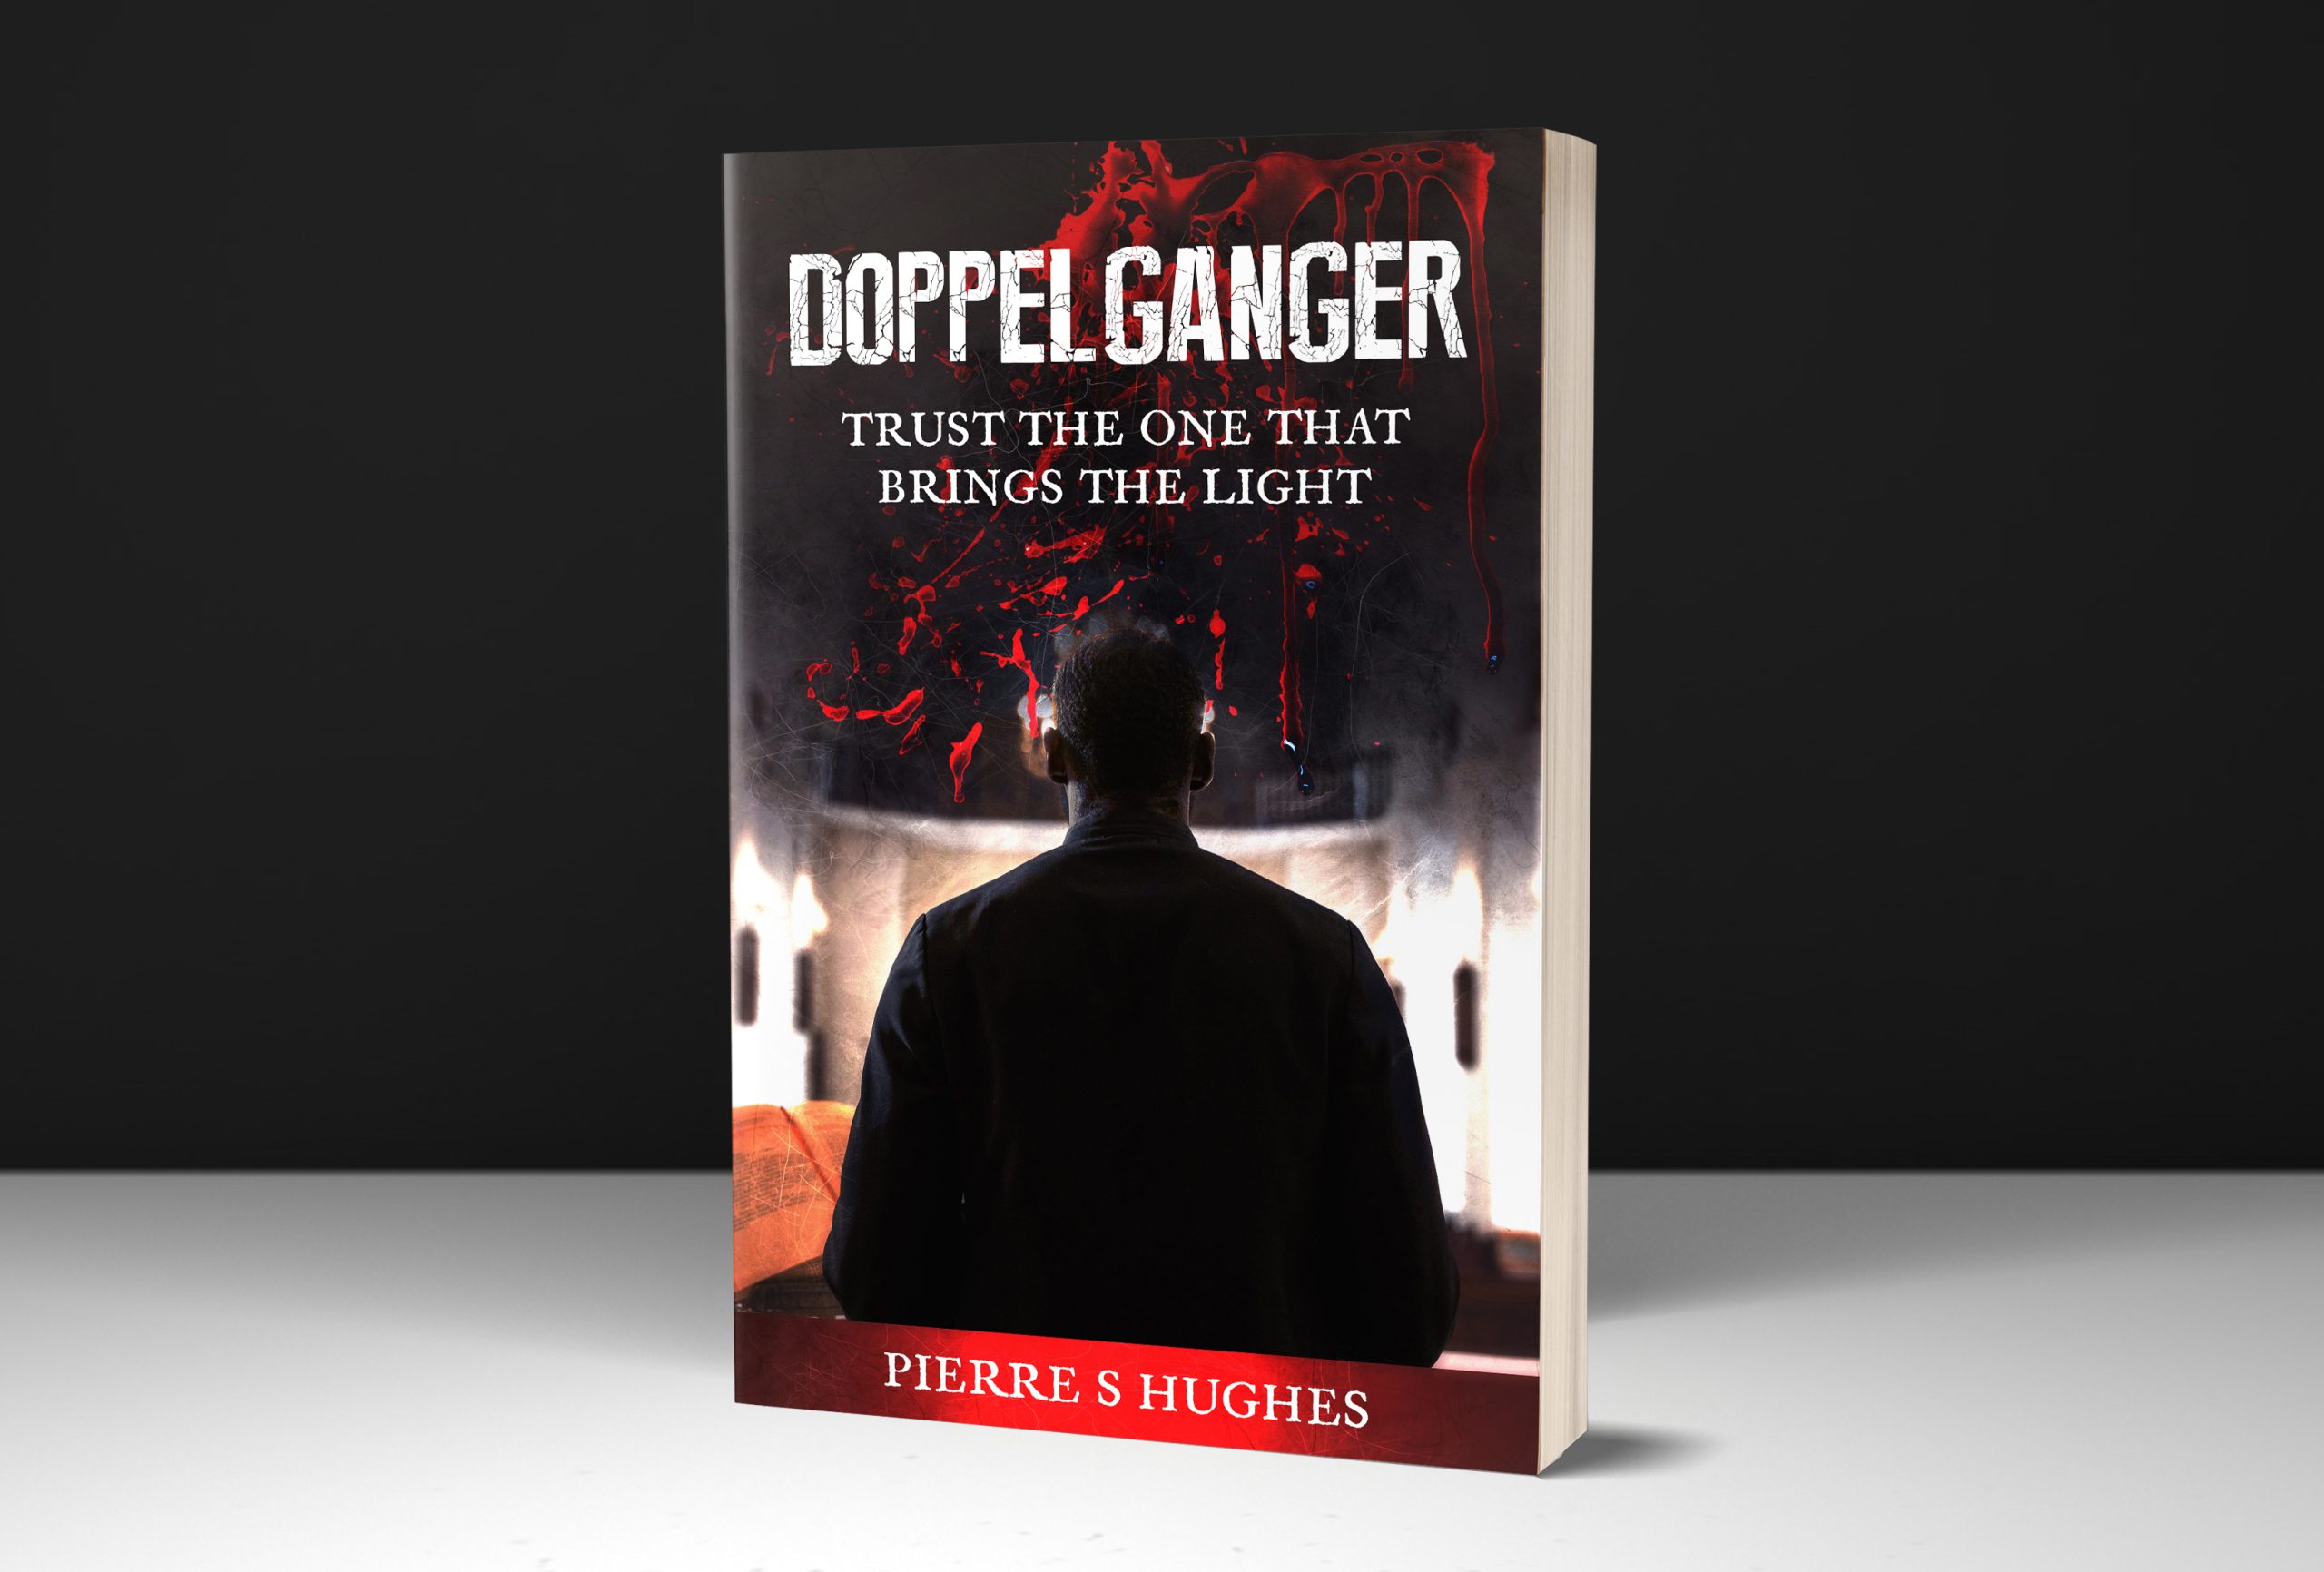 New book Doppelgänger: “Trust the one that brings the light” tells tale of Covid-19 tragedy